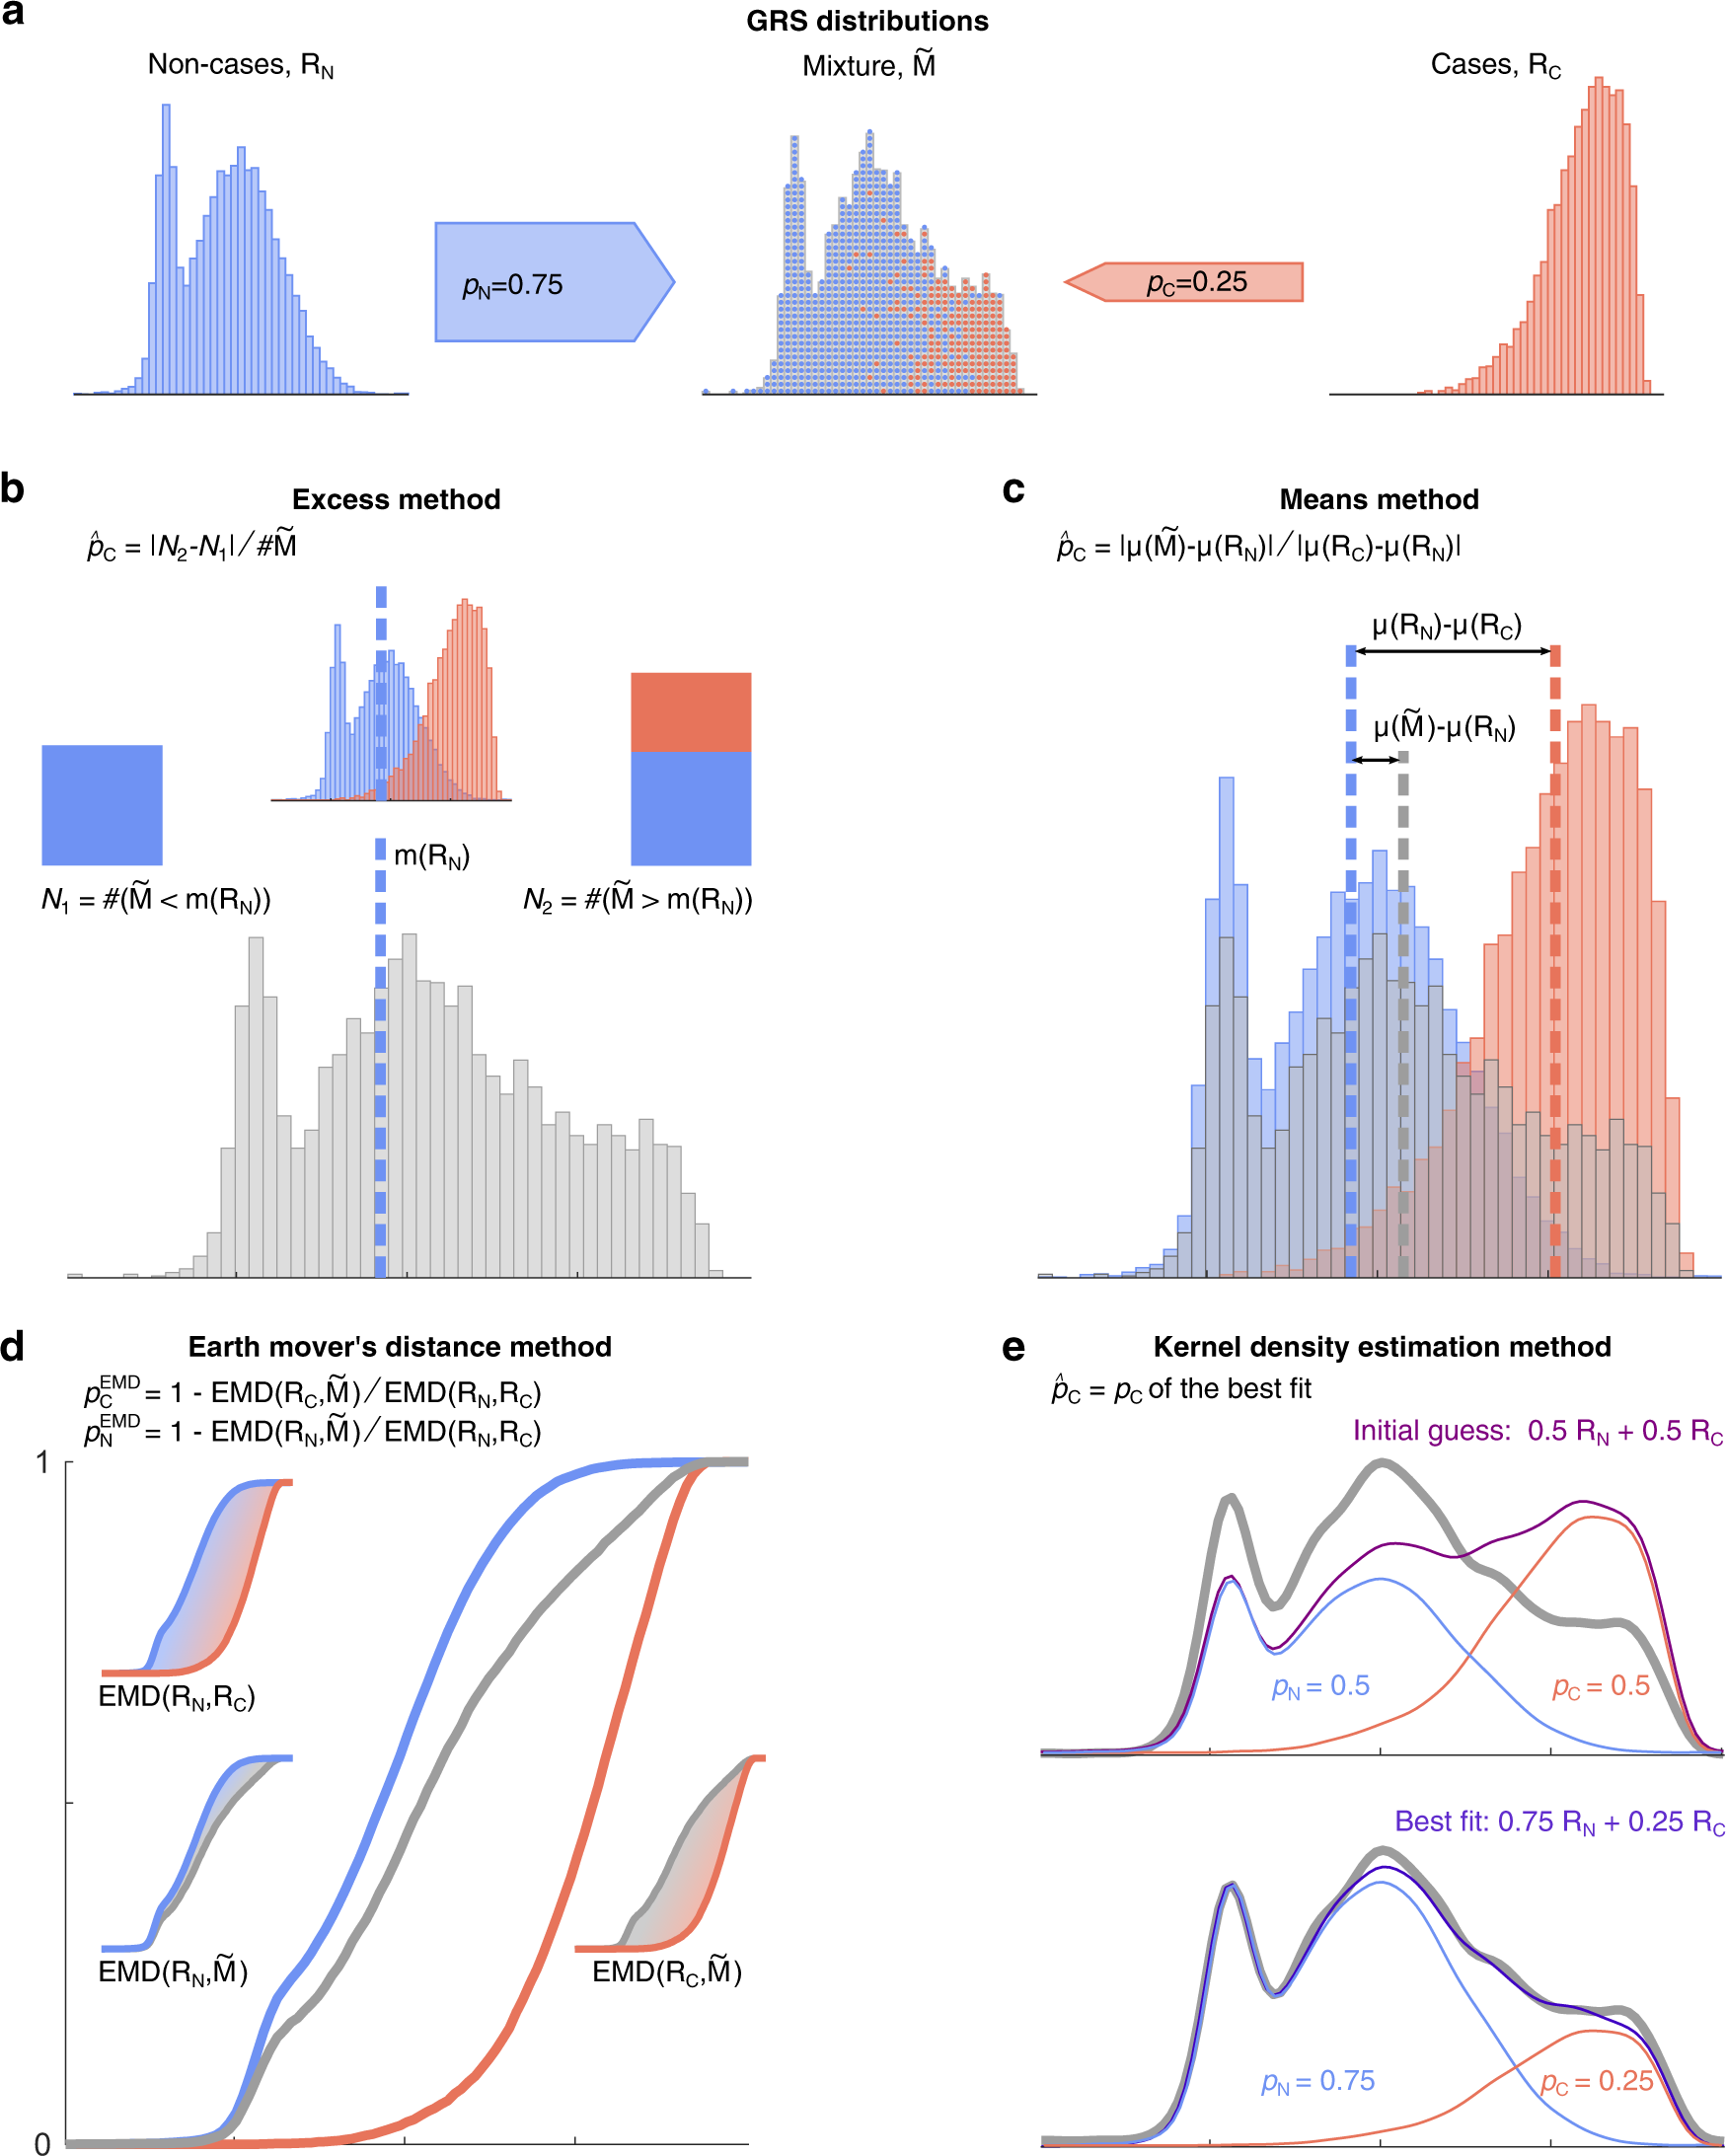 Estimating disease prevalence in large datasets using genetic risk scores |  Nature Communications